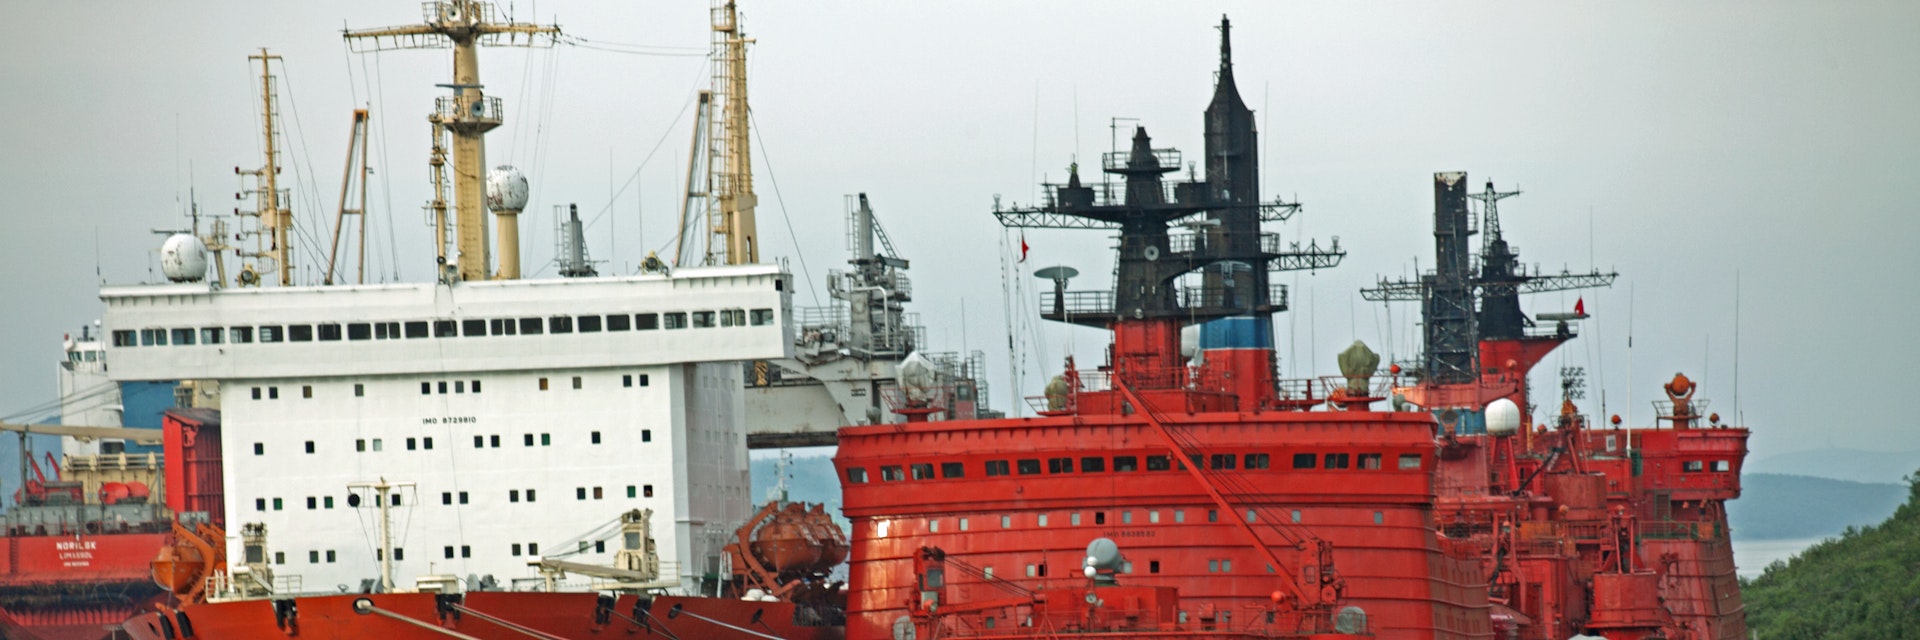 Russian nuclear-powered icebreakers